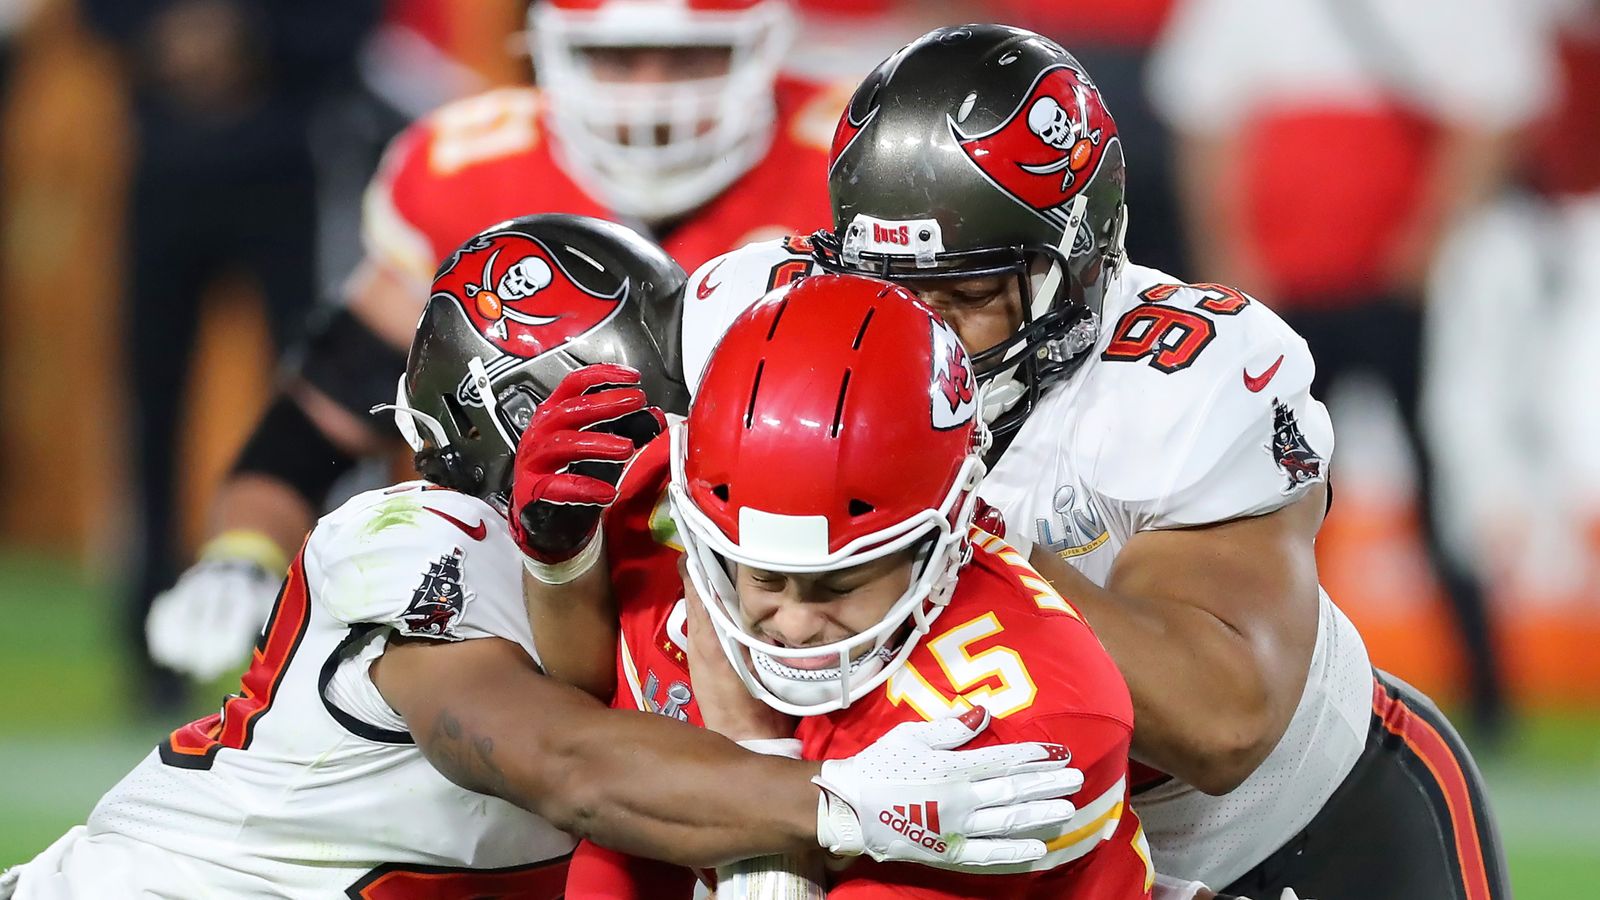 Creed Humphrey, Trey Smith didn't allow pressures in Chiefs' win